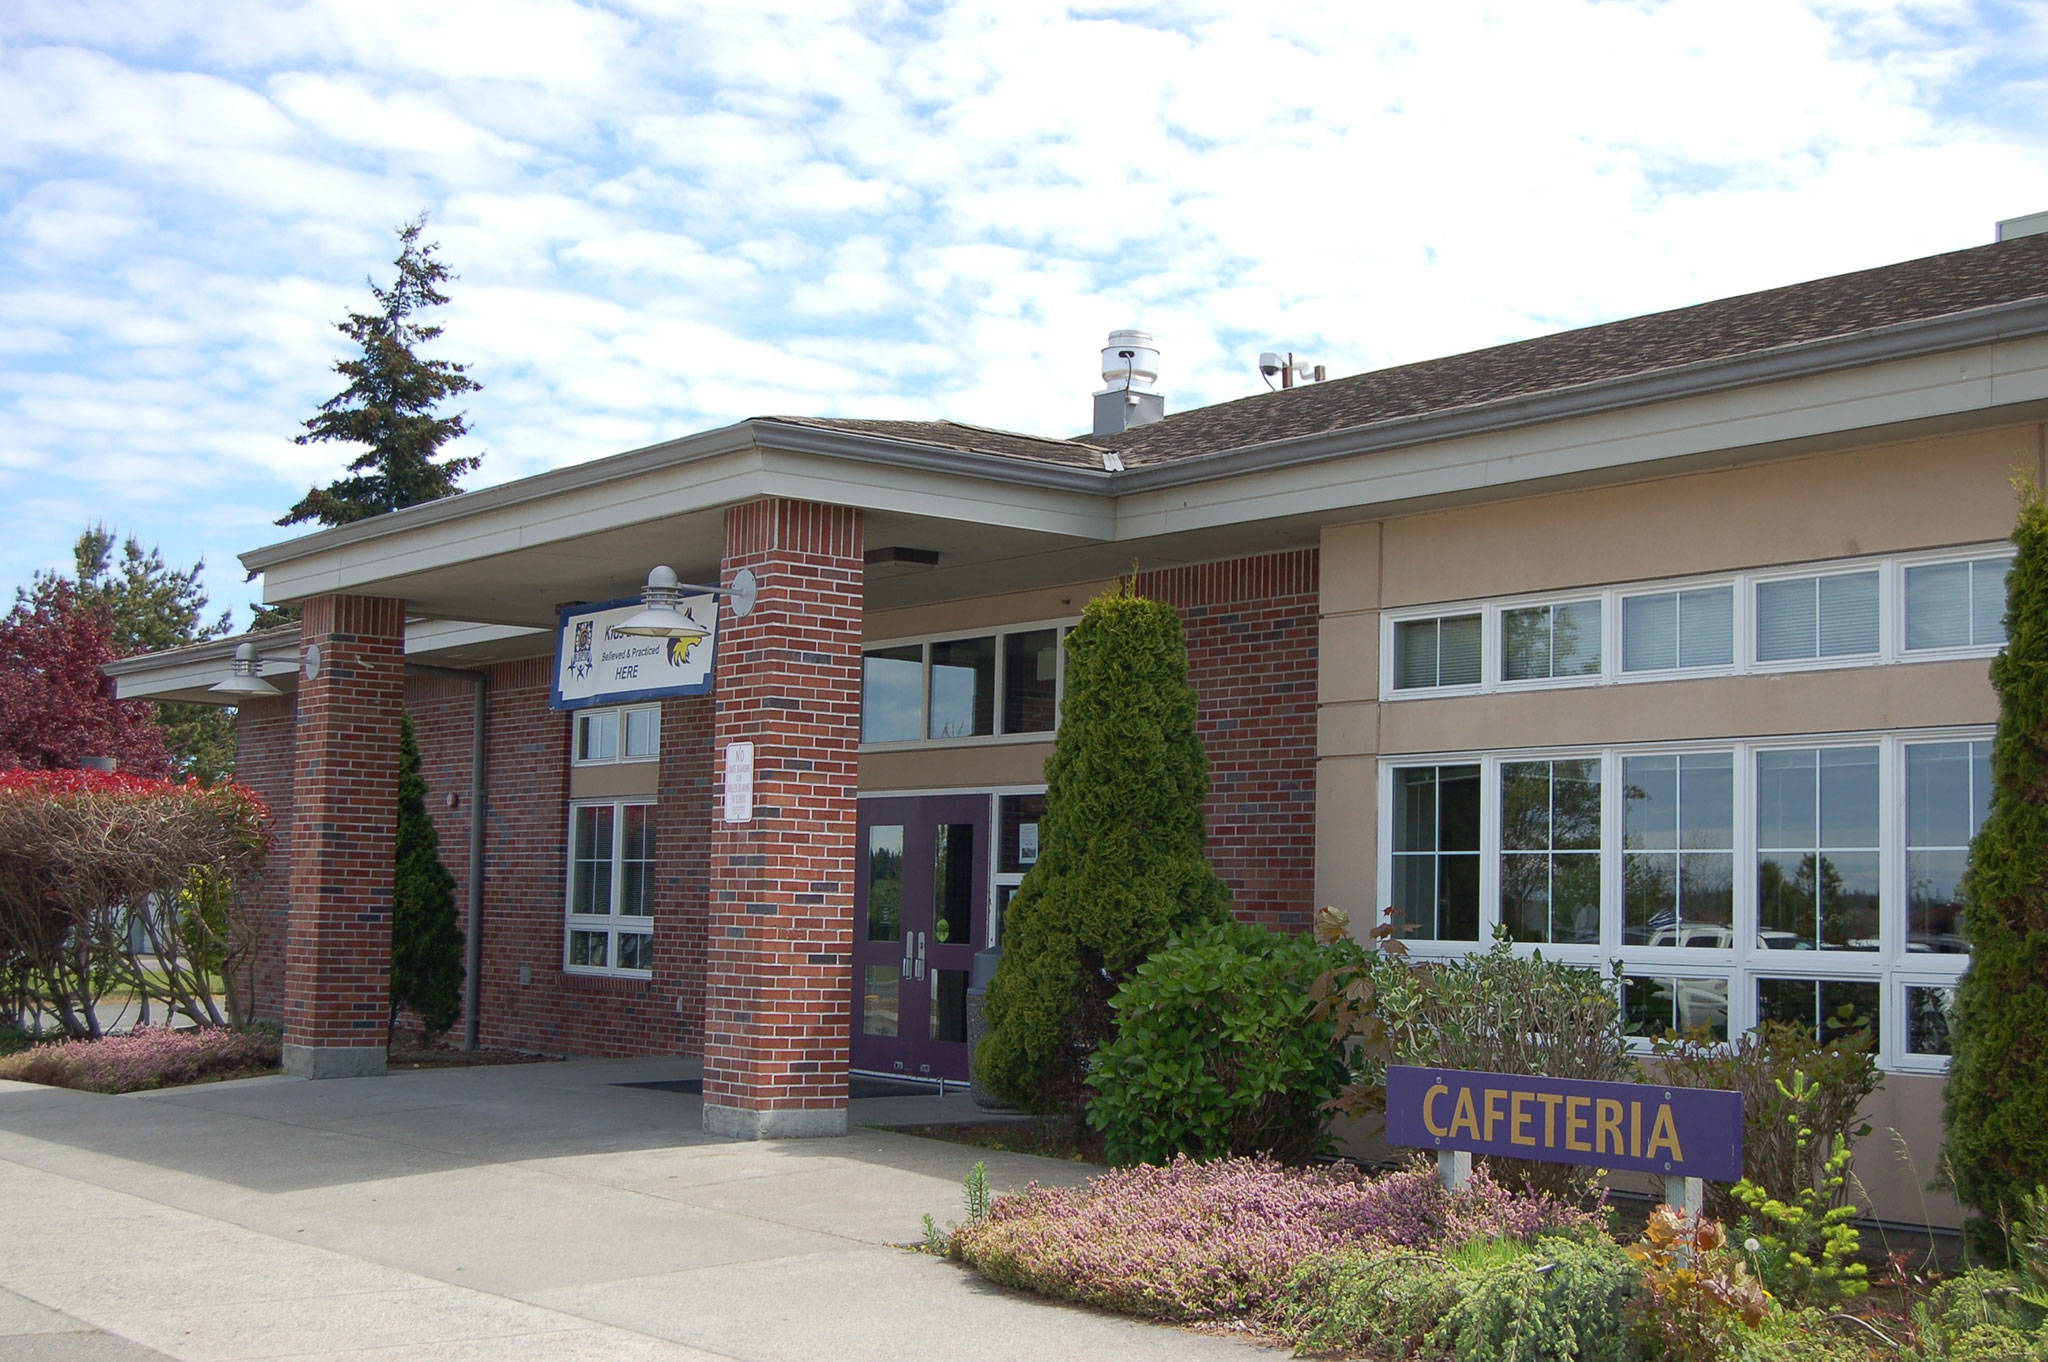 Sequim Schools’ meal prices may increase